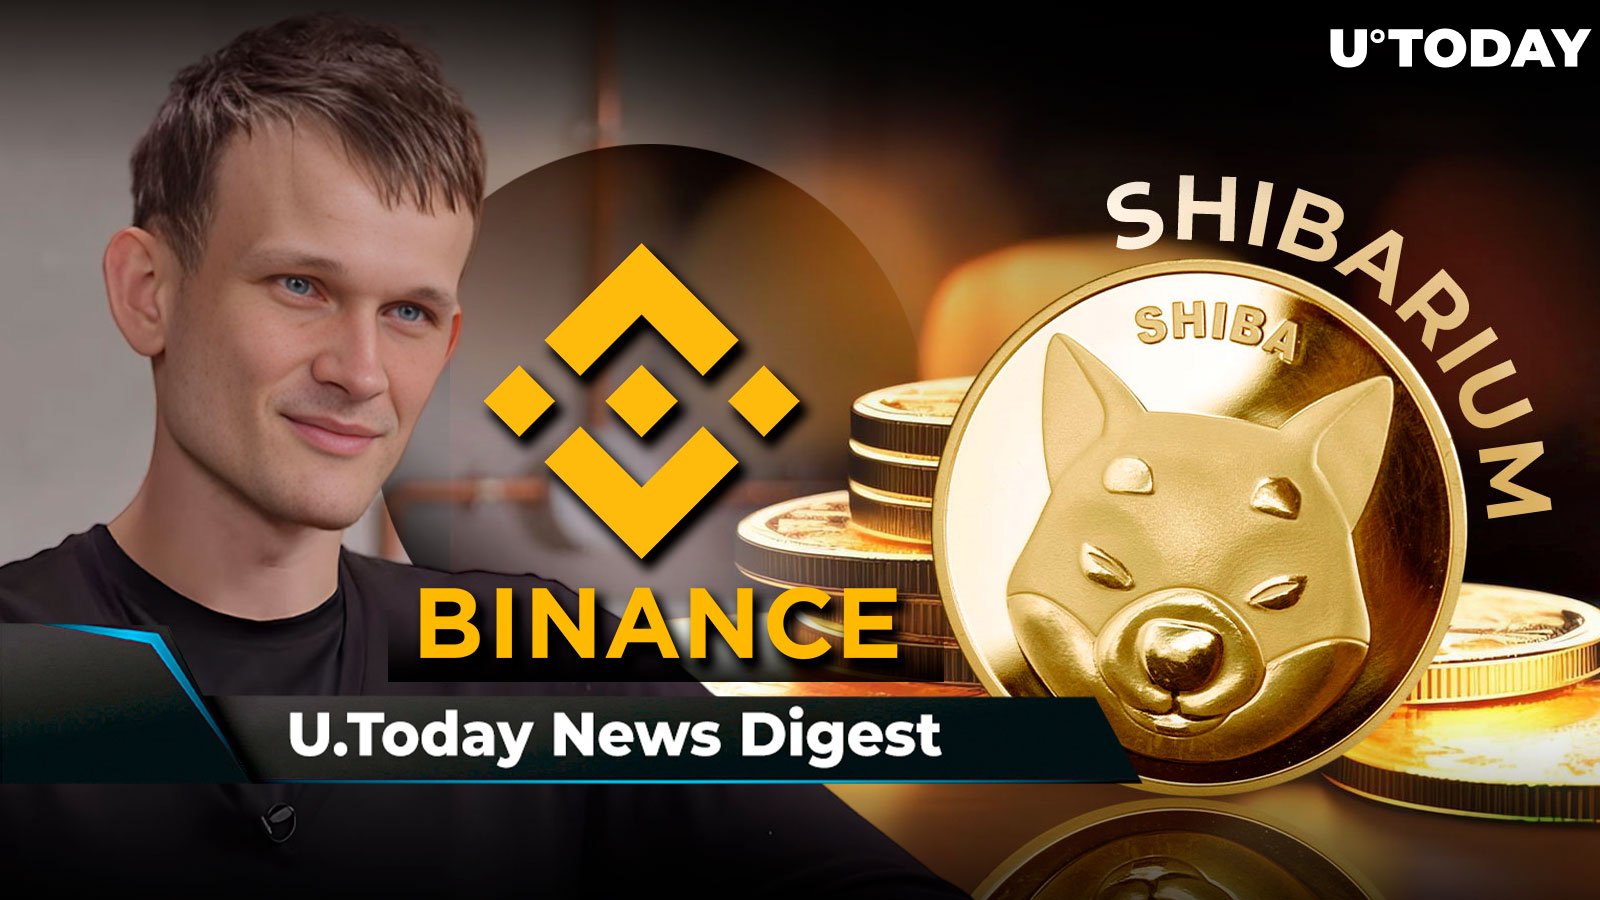 Ethereum's Vitalik Buterin Makes Surprising Visit to Binance, SHIB Rep Shares Shibarium's Plans to Onboard Thousands of Projects: Crypto News Digest by U.Today